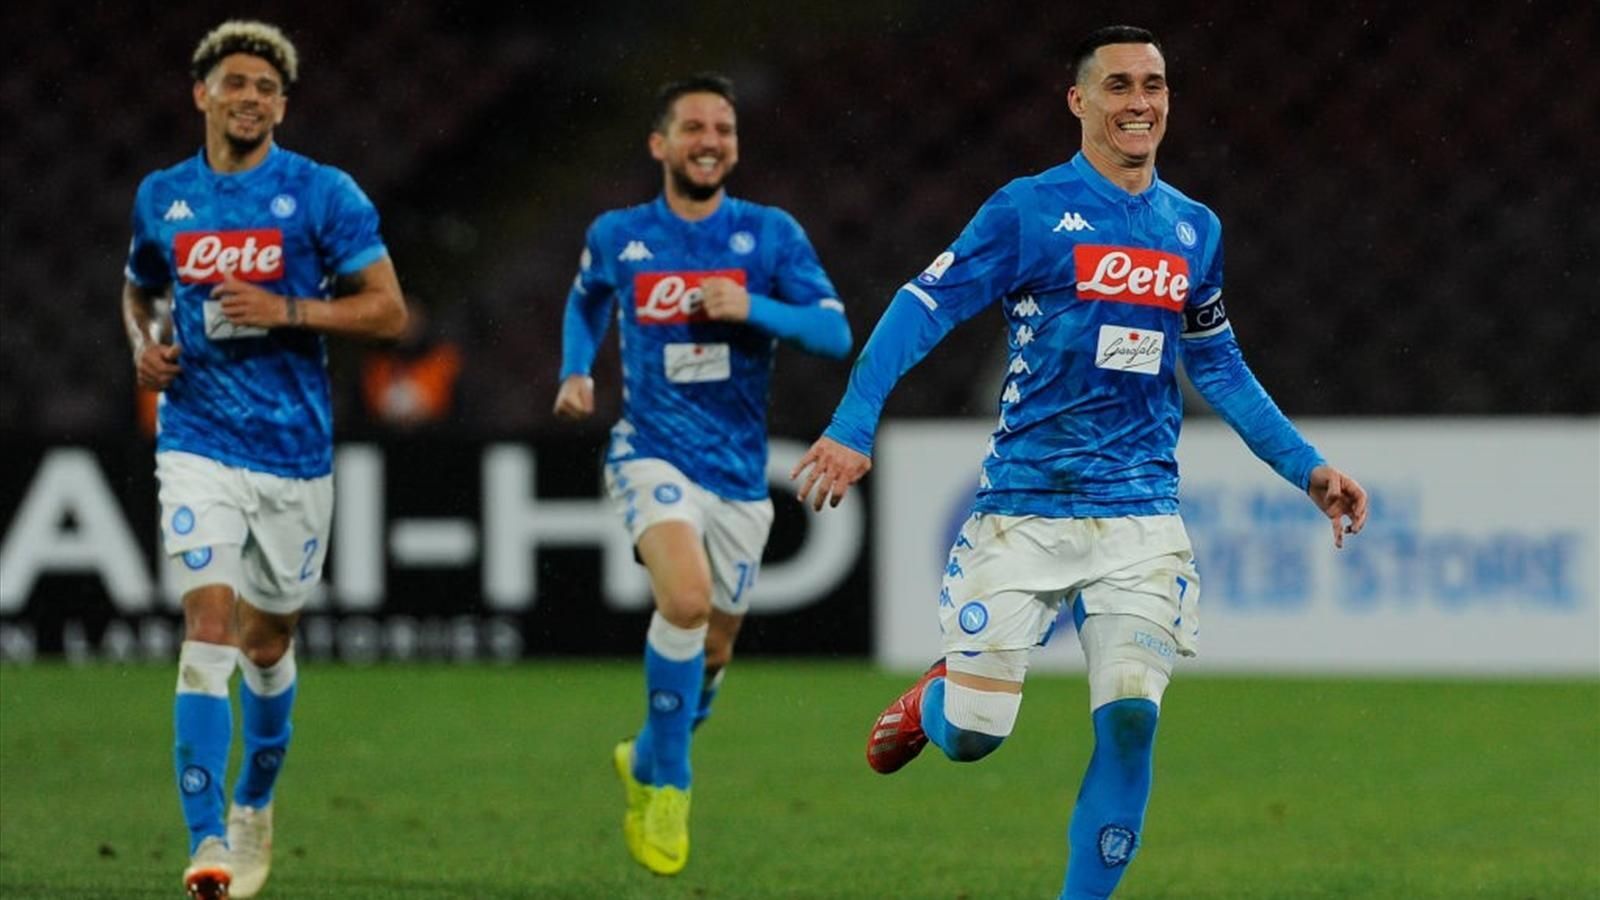 Mertens to sign a new deal with Napoli but Callejon could leave